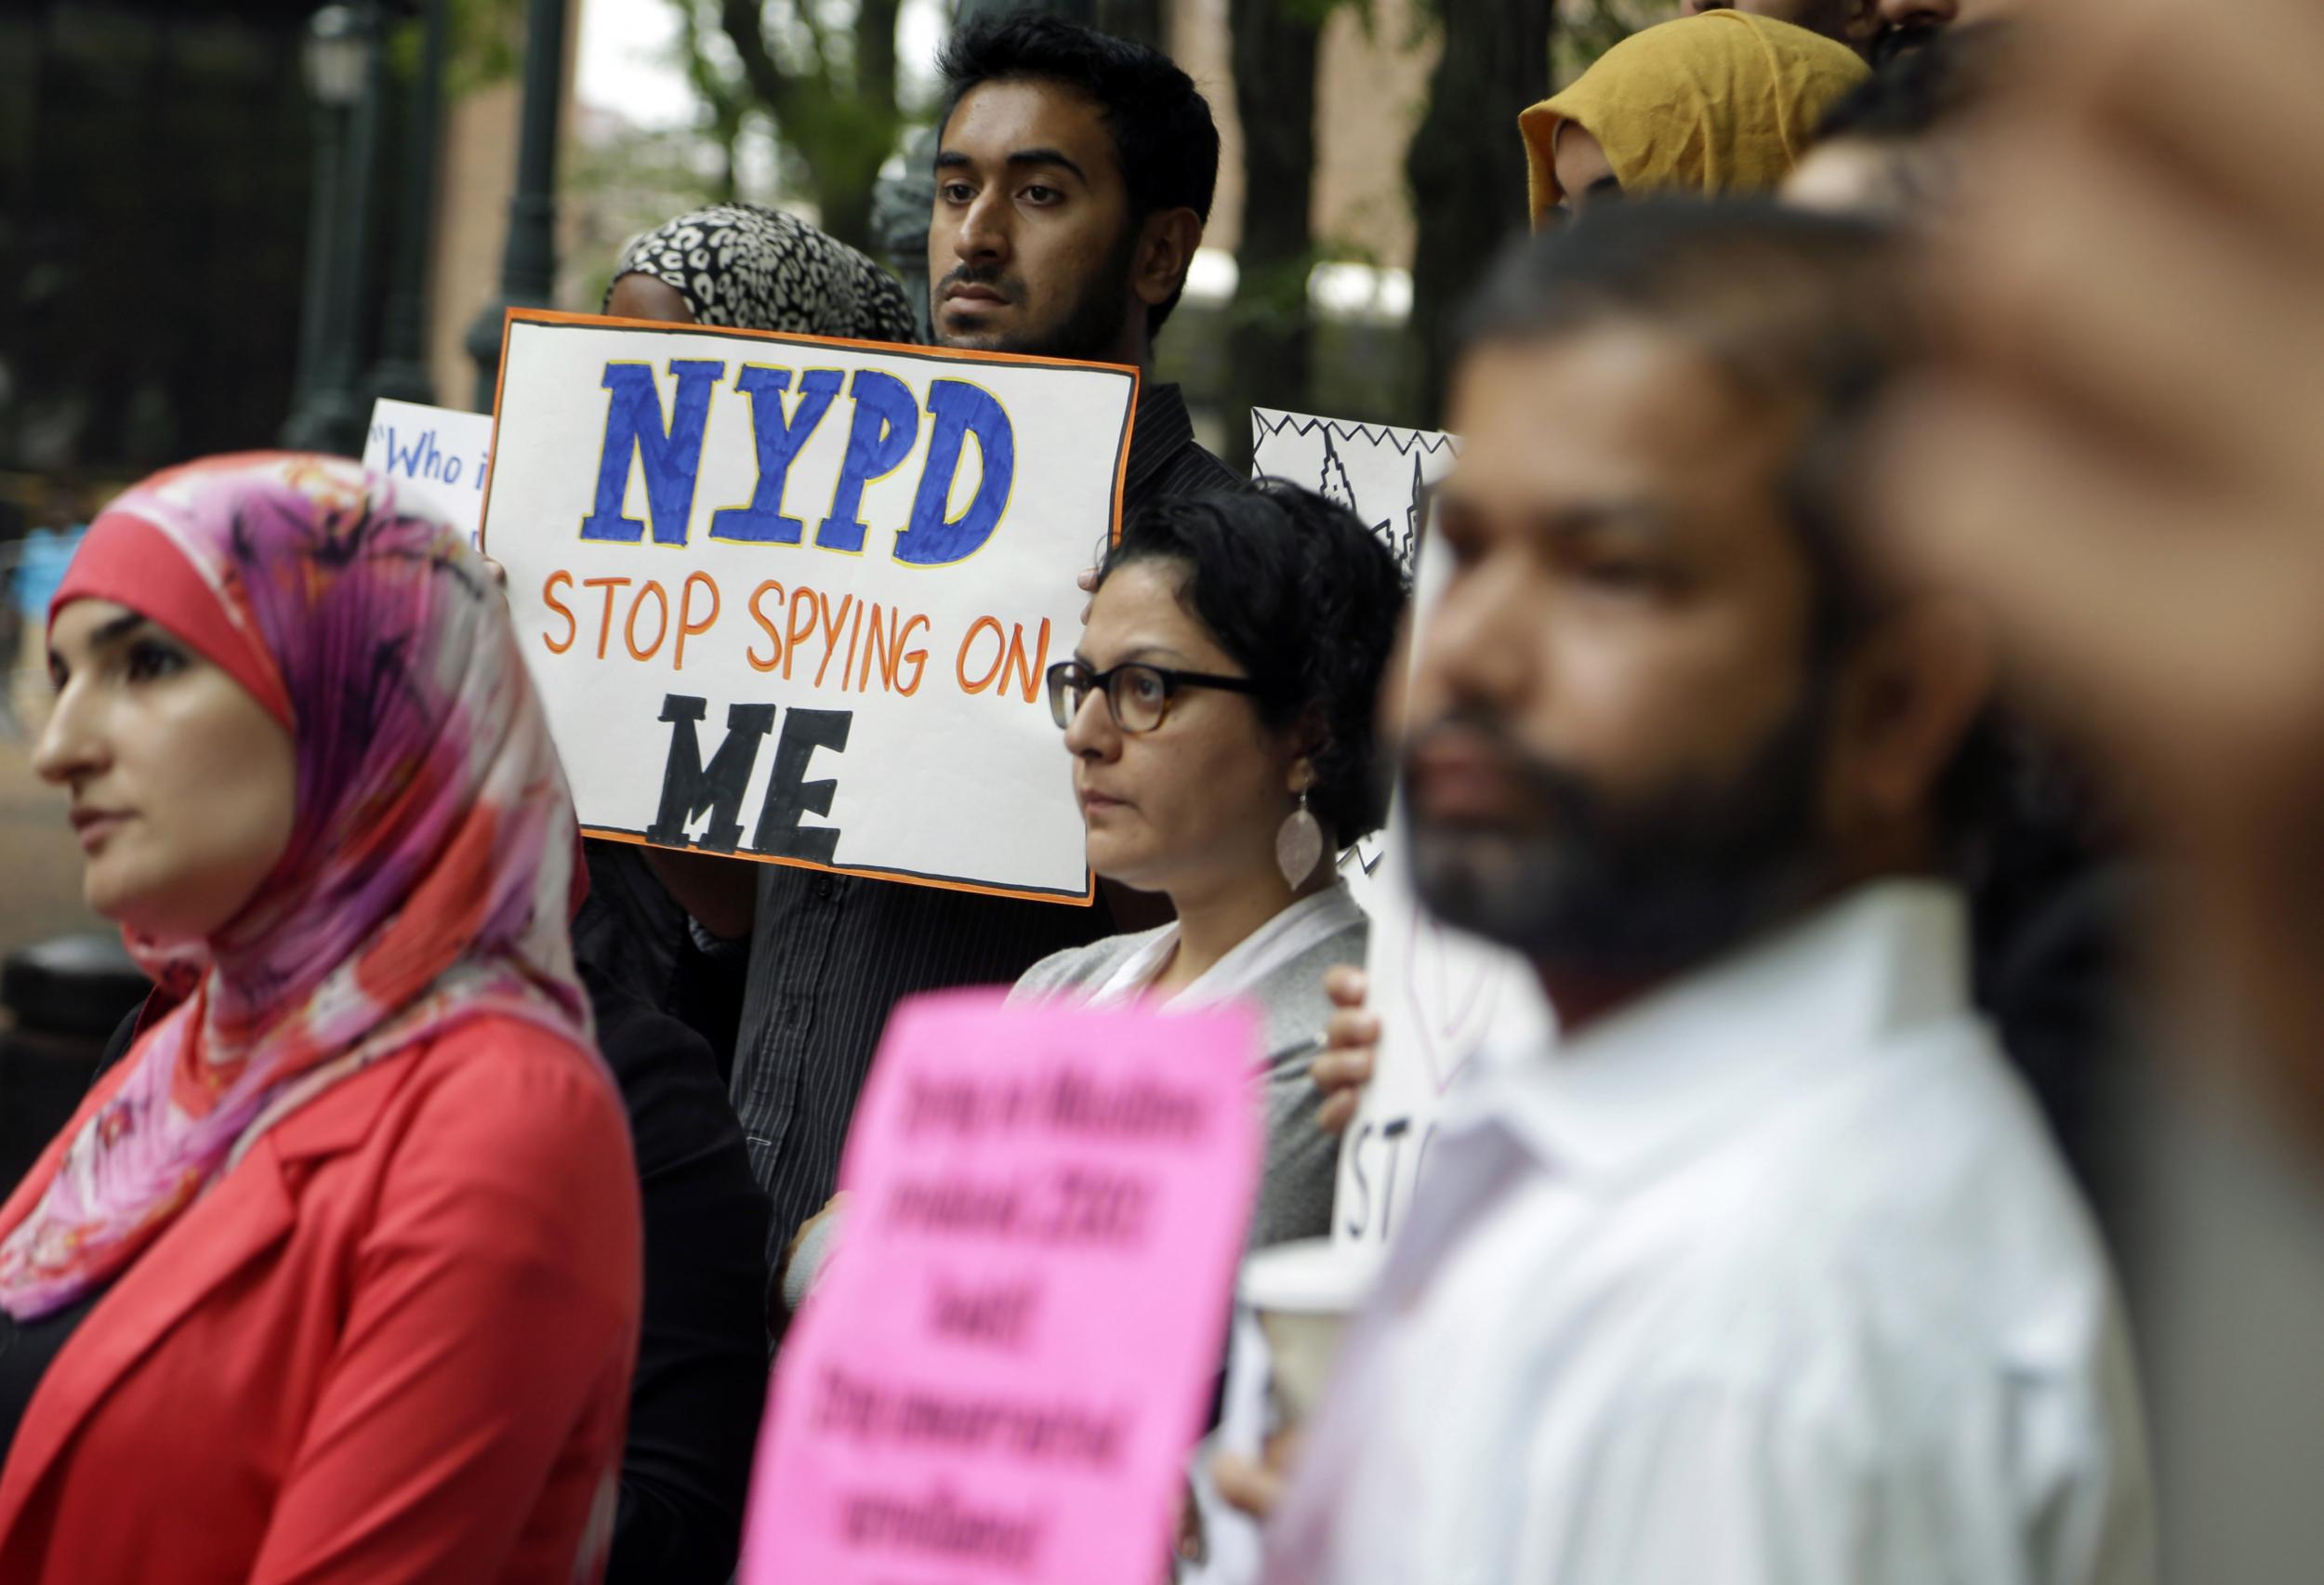 Protesters rally against the NYPD.